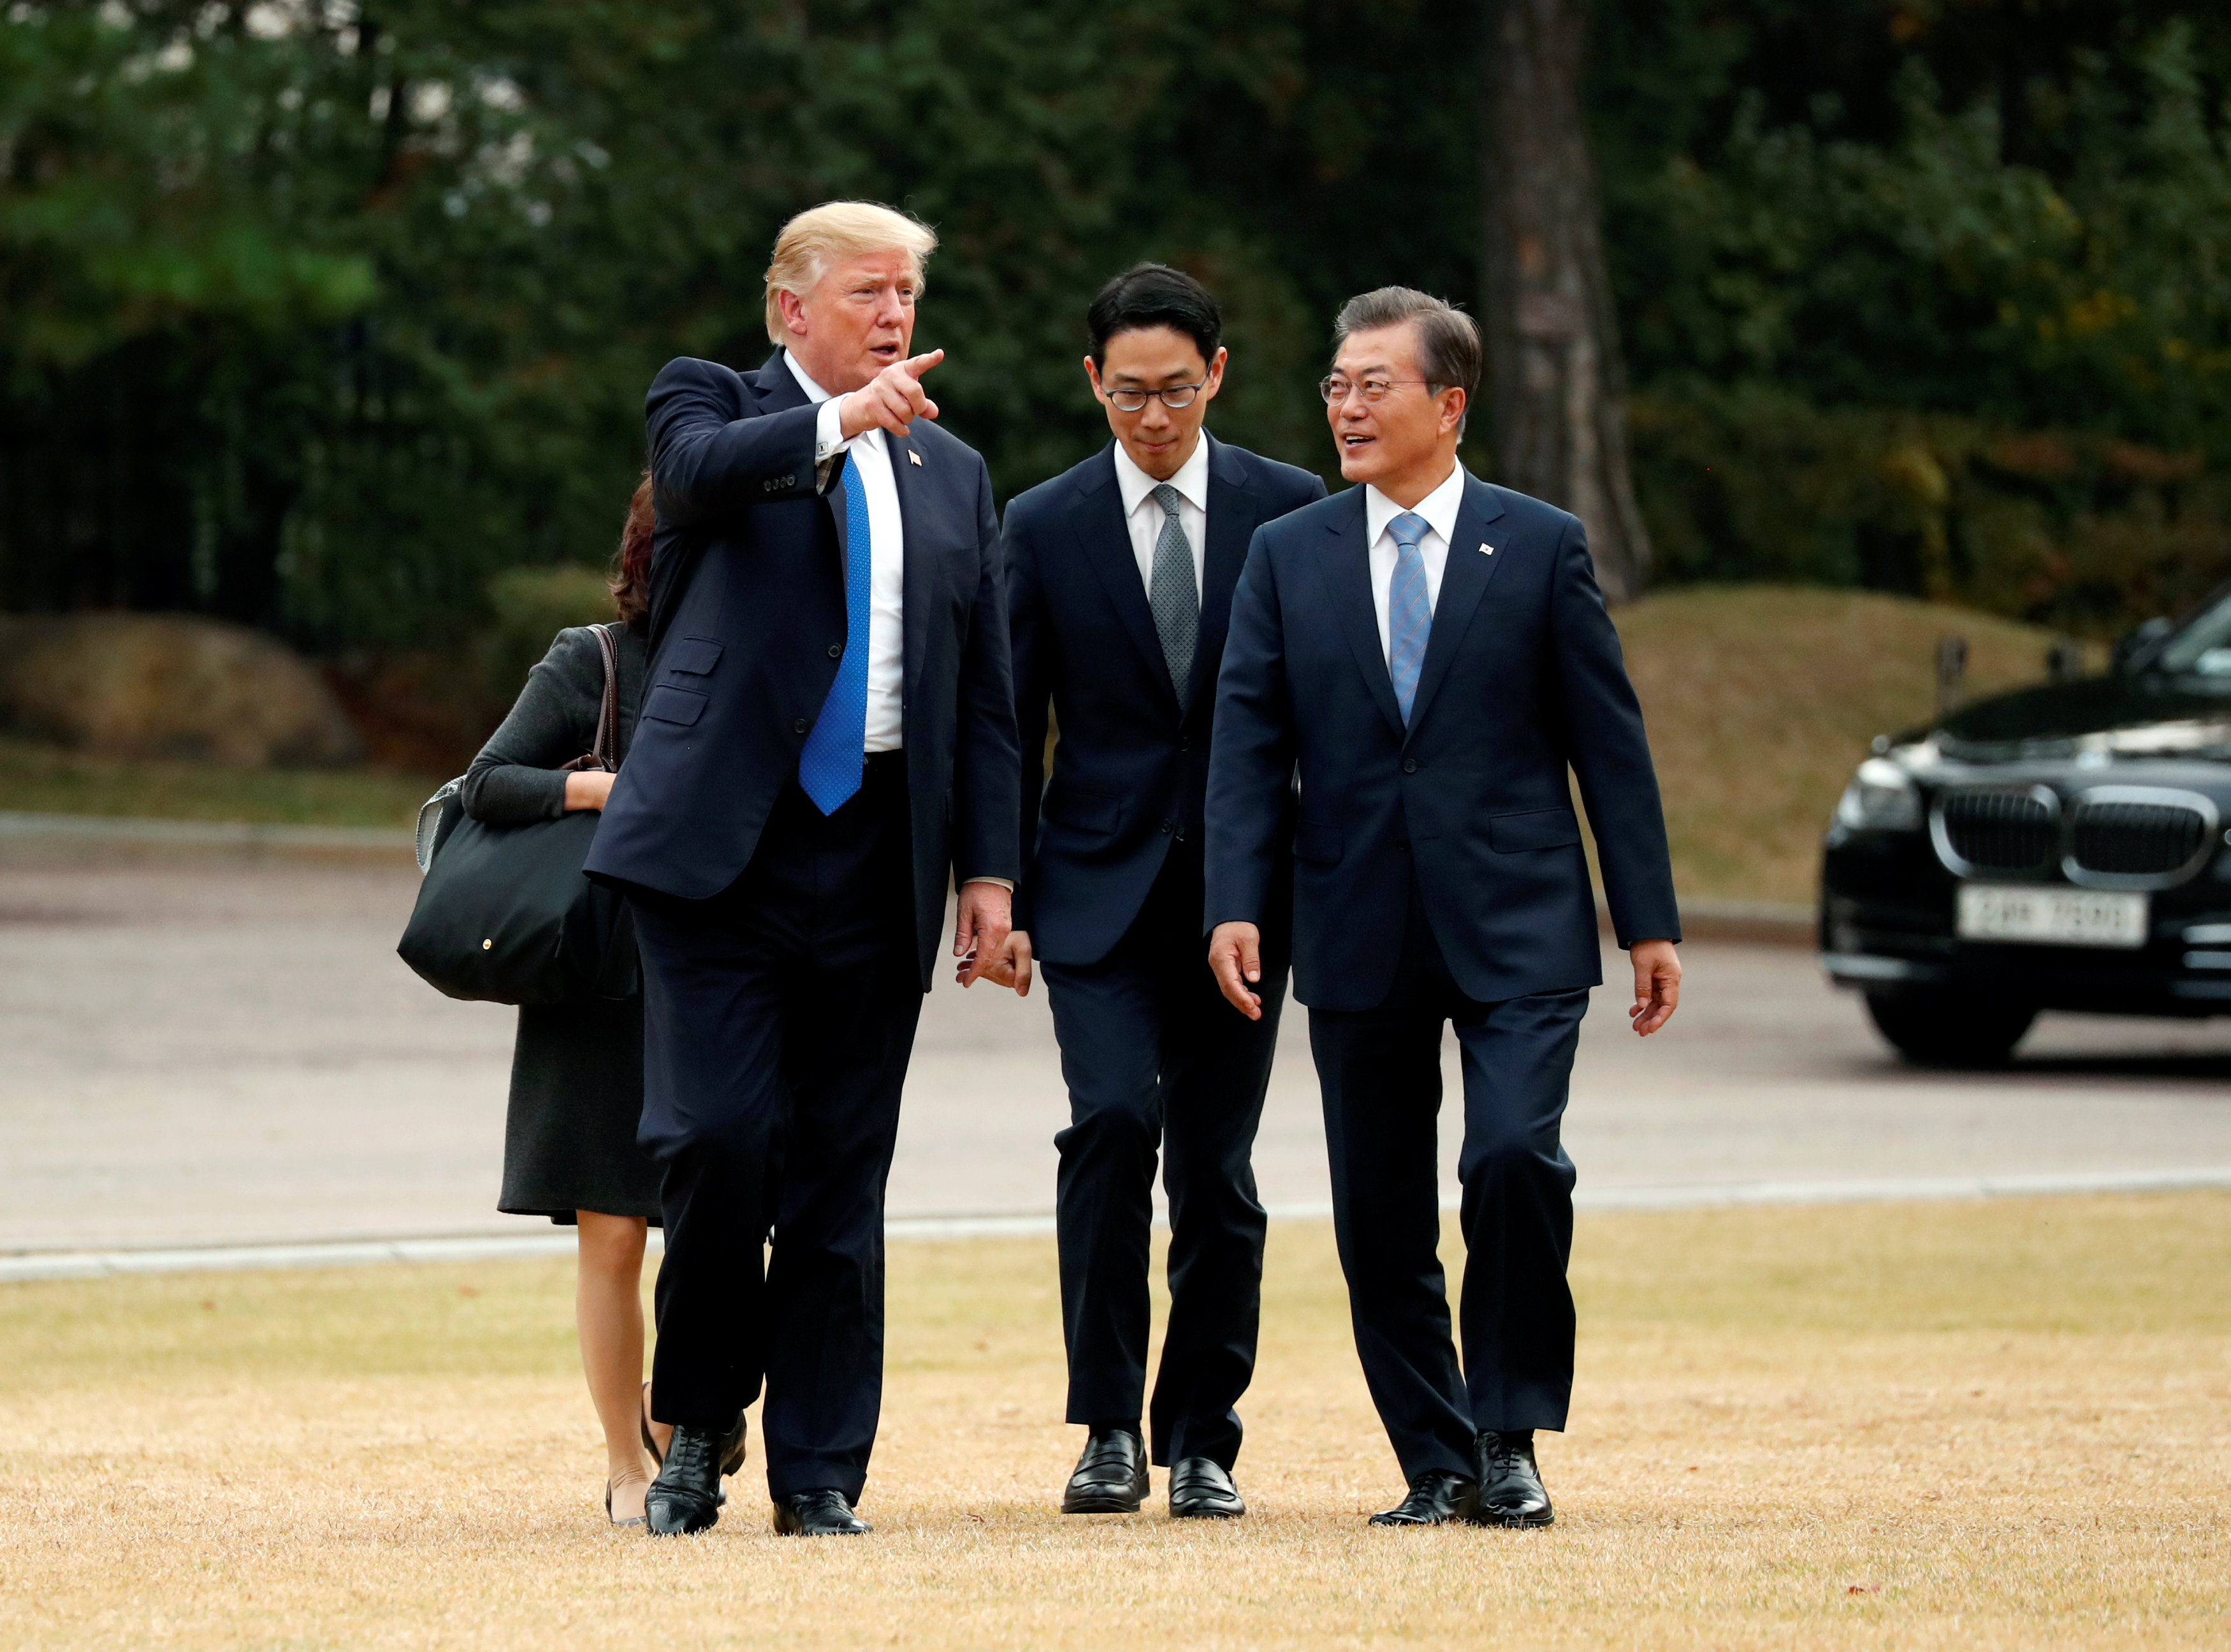 In pictures: U.S. President Donald Trump in South Korea